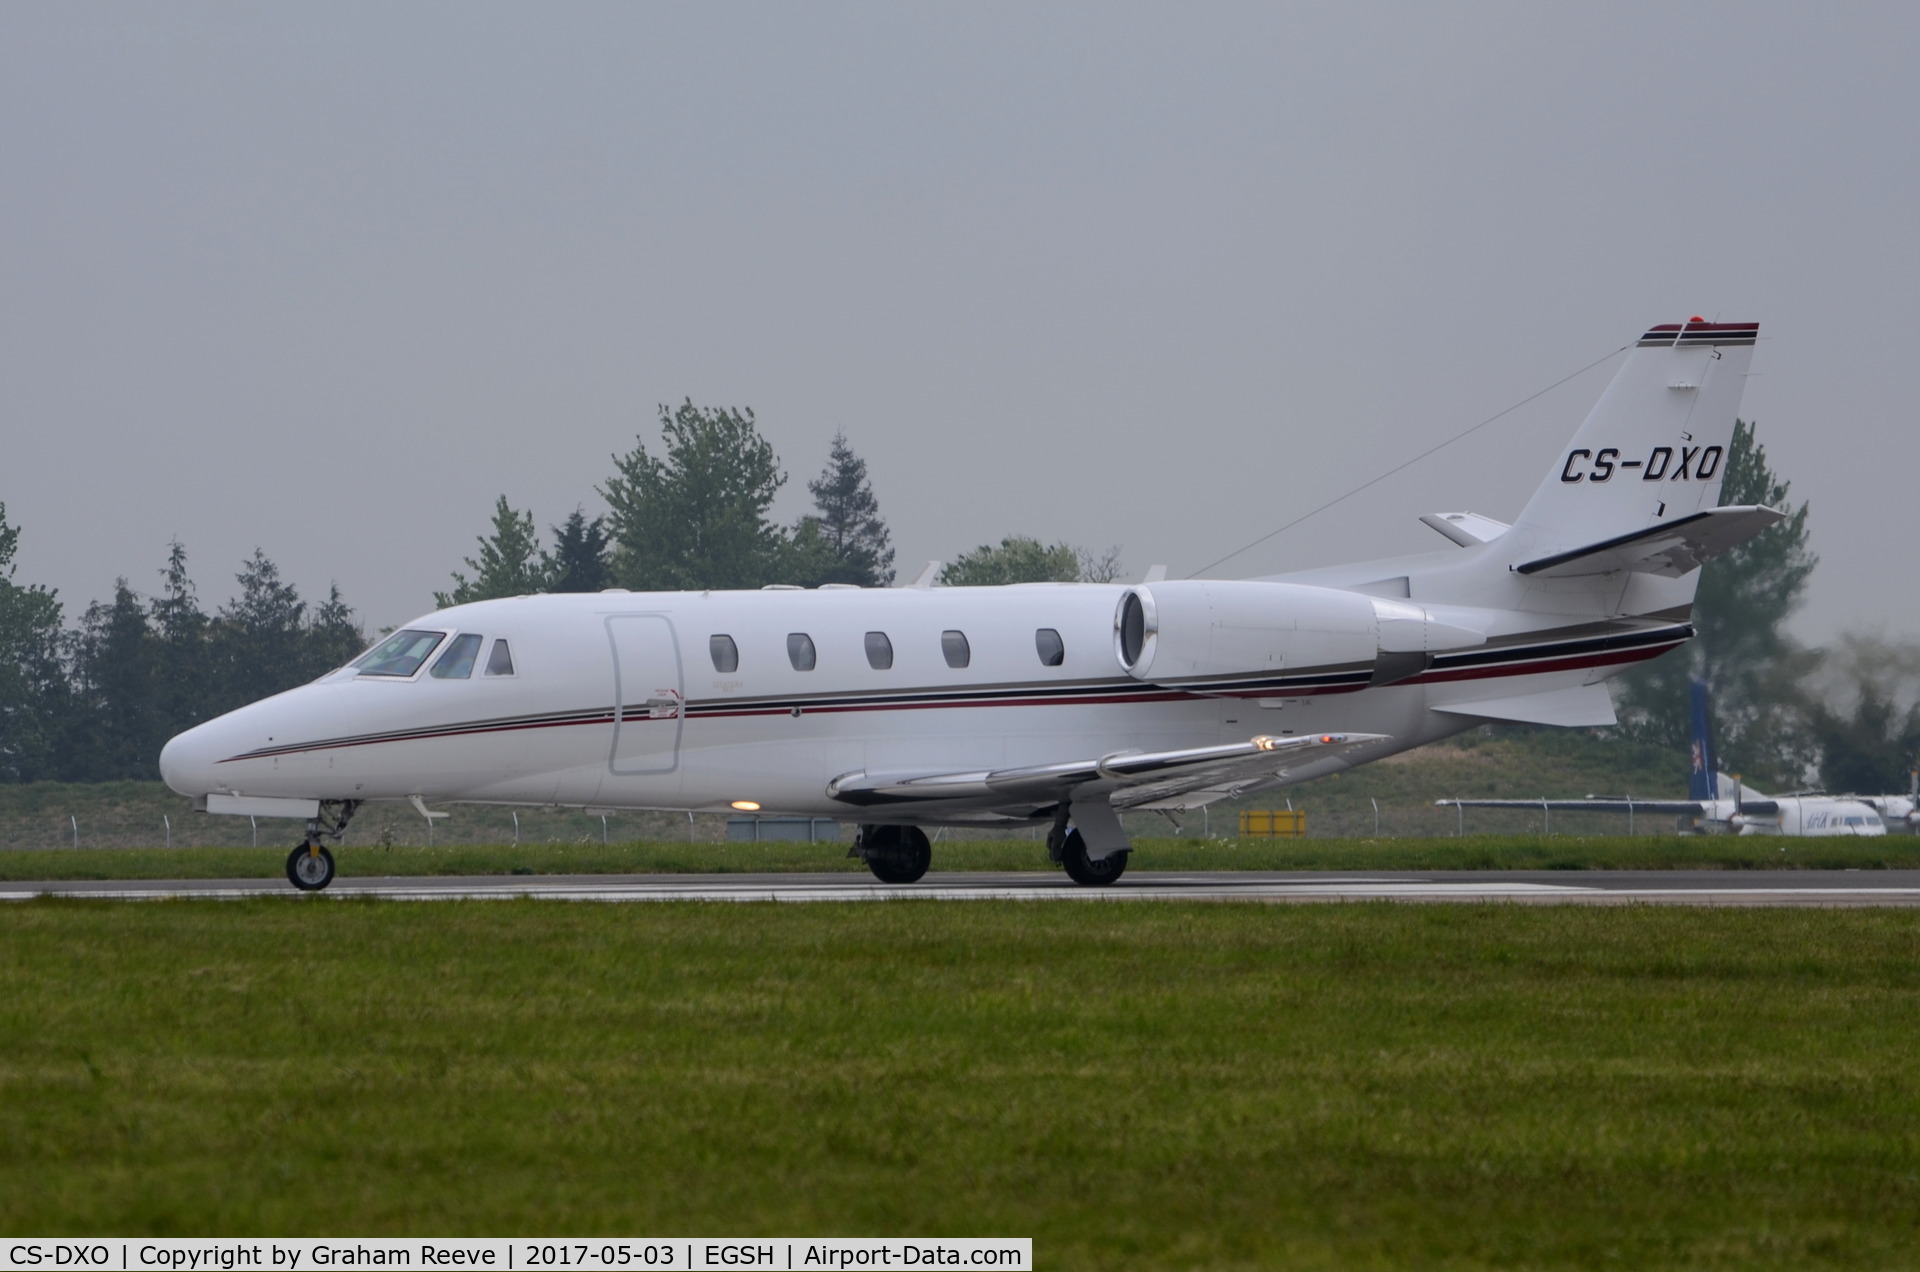 CS-DXO, 2007 Cessna 560 Citation Excel C/N 560-5692, About to depart from Norwich.